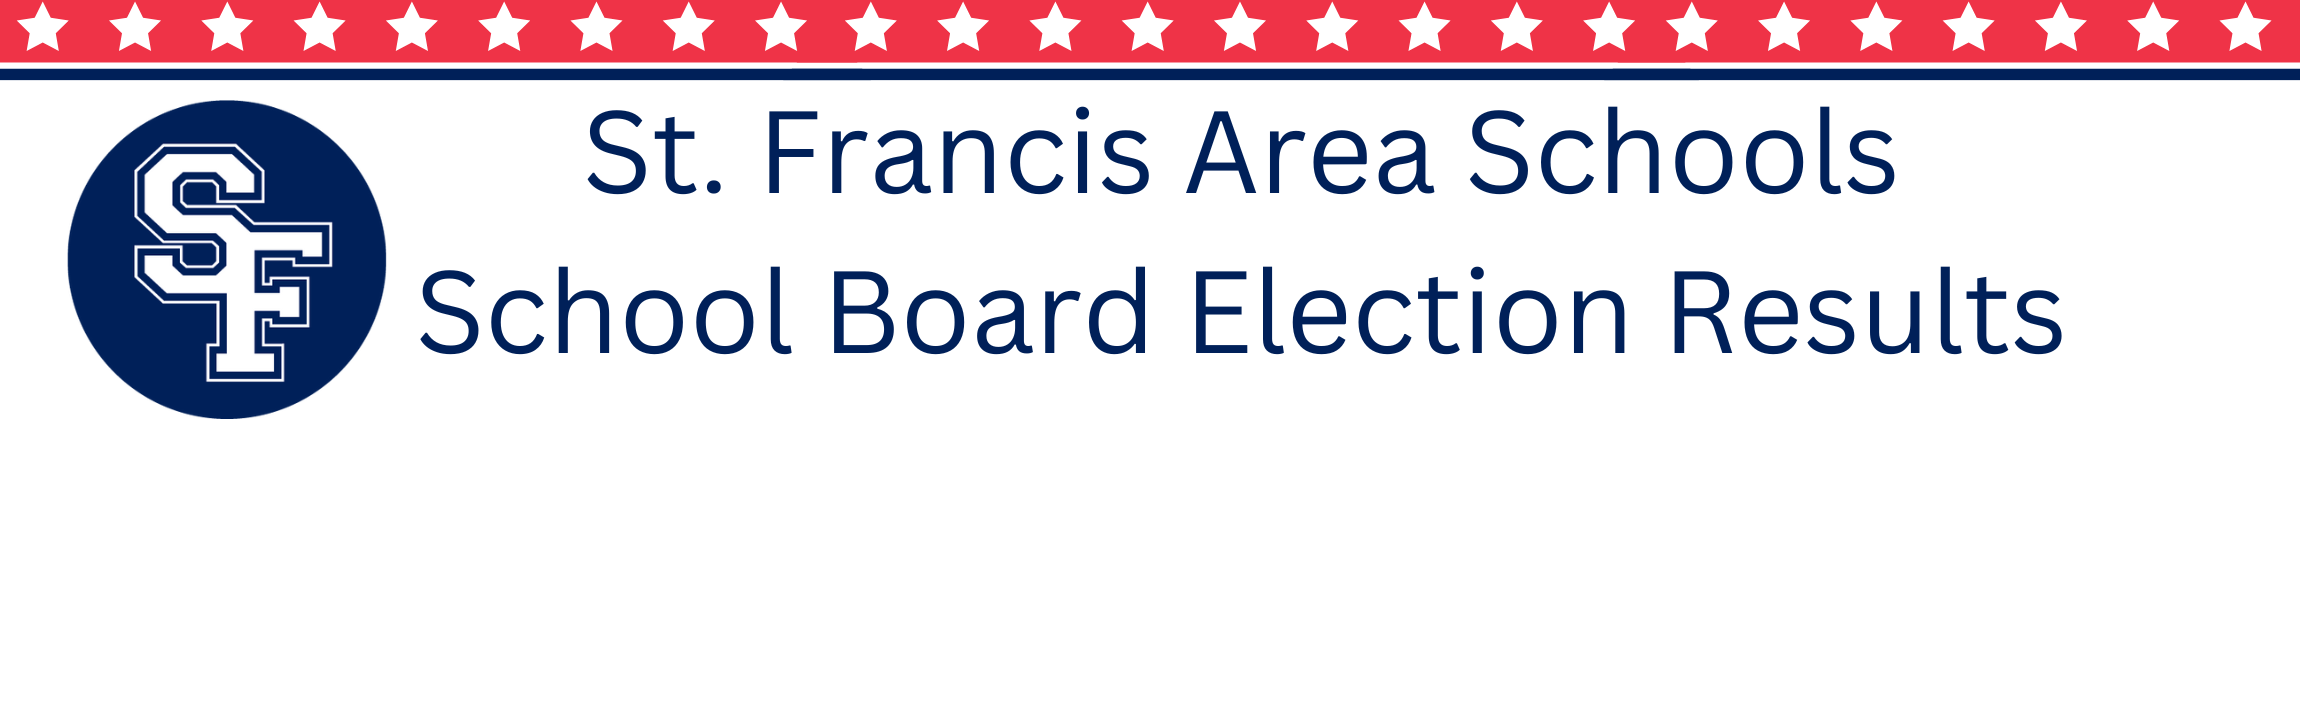 Image: Graphic for school board election